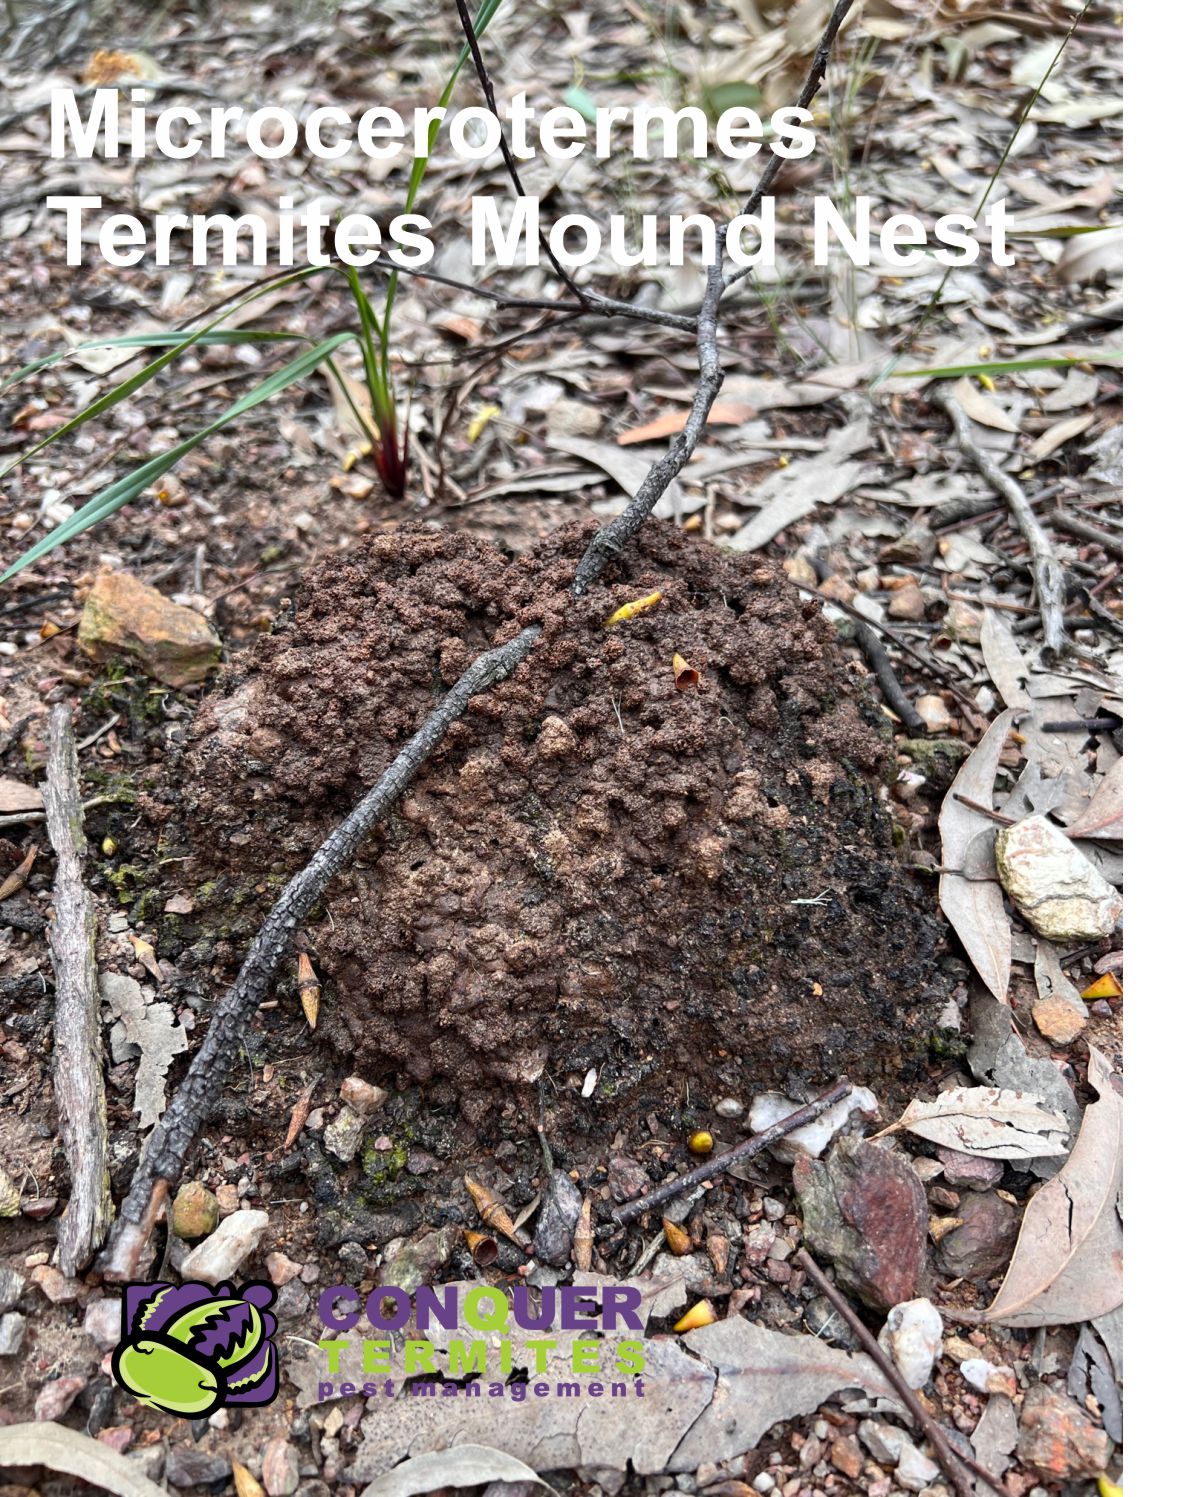 Microcerotermes mound nest